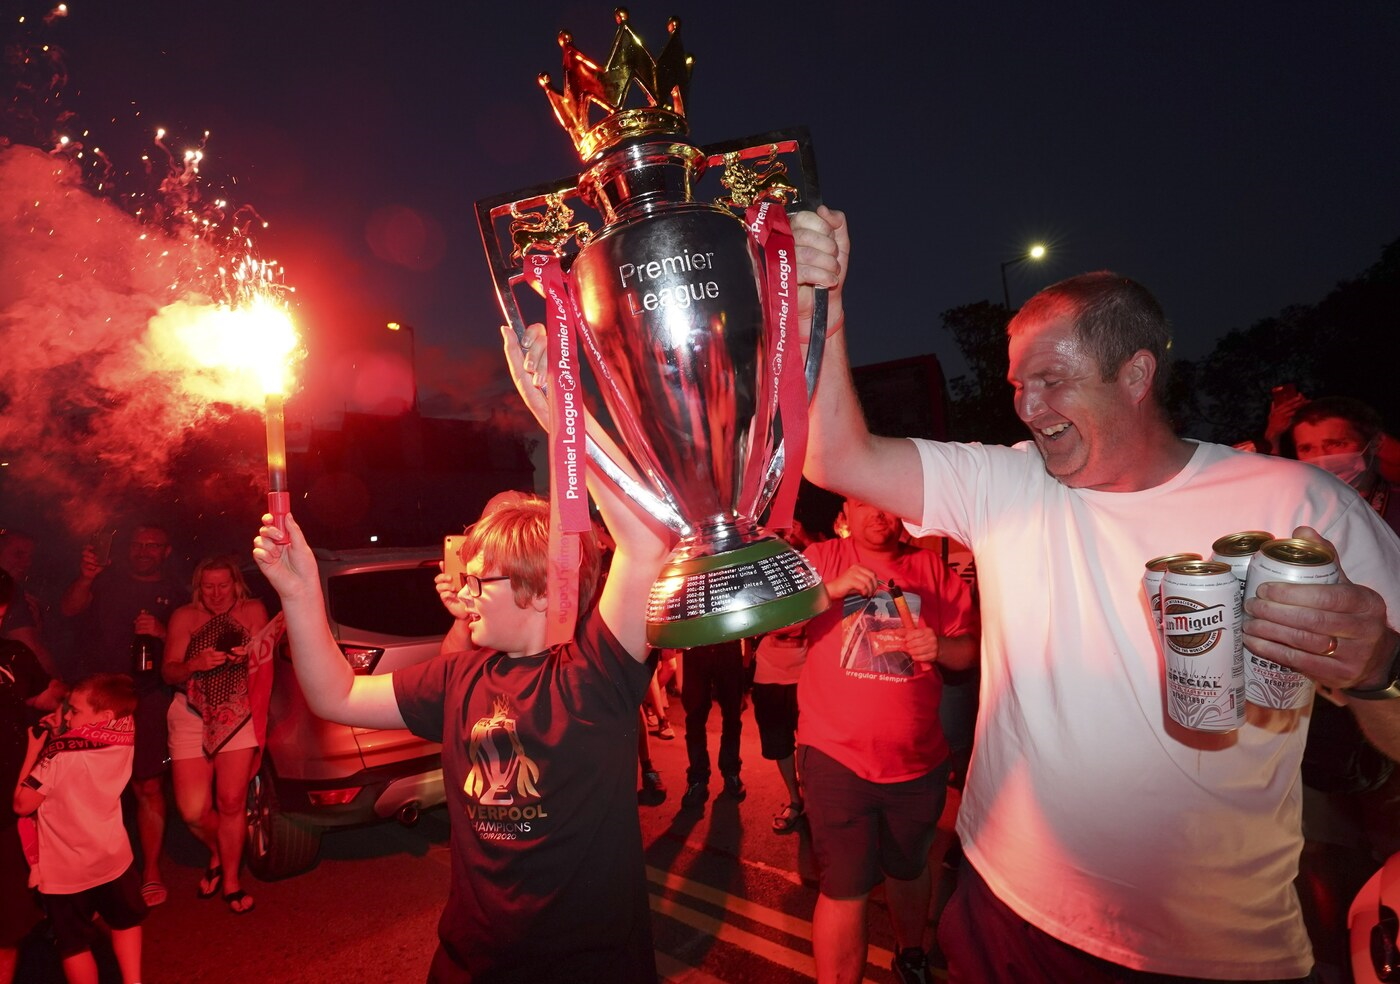 Liverpool supporters hold a replica Premier League trophy as they celebrate outside of Anfield Stadium in Liverpool, England, Thursday, June 25, 2020 after Liverpool clinched the English Premier League title. Liverpool took the title after Manchester City failed to beat Chelsea on Wednesday evening. (AP photo/Jon Super)